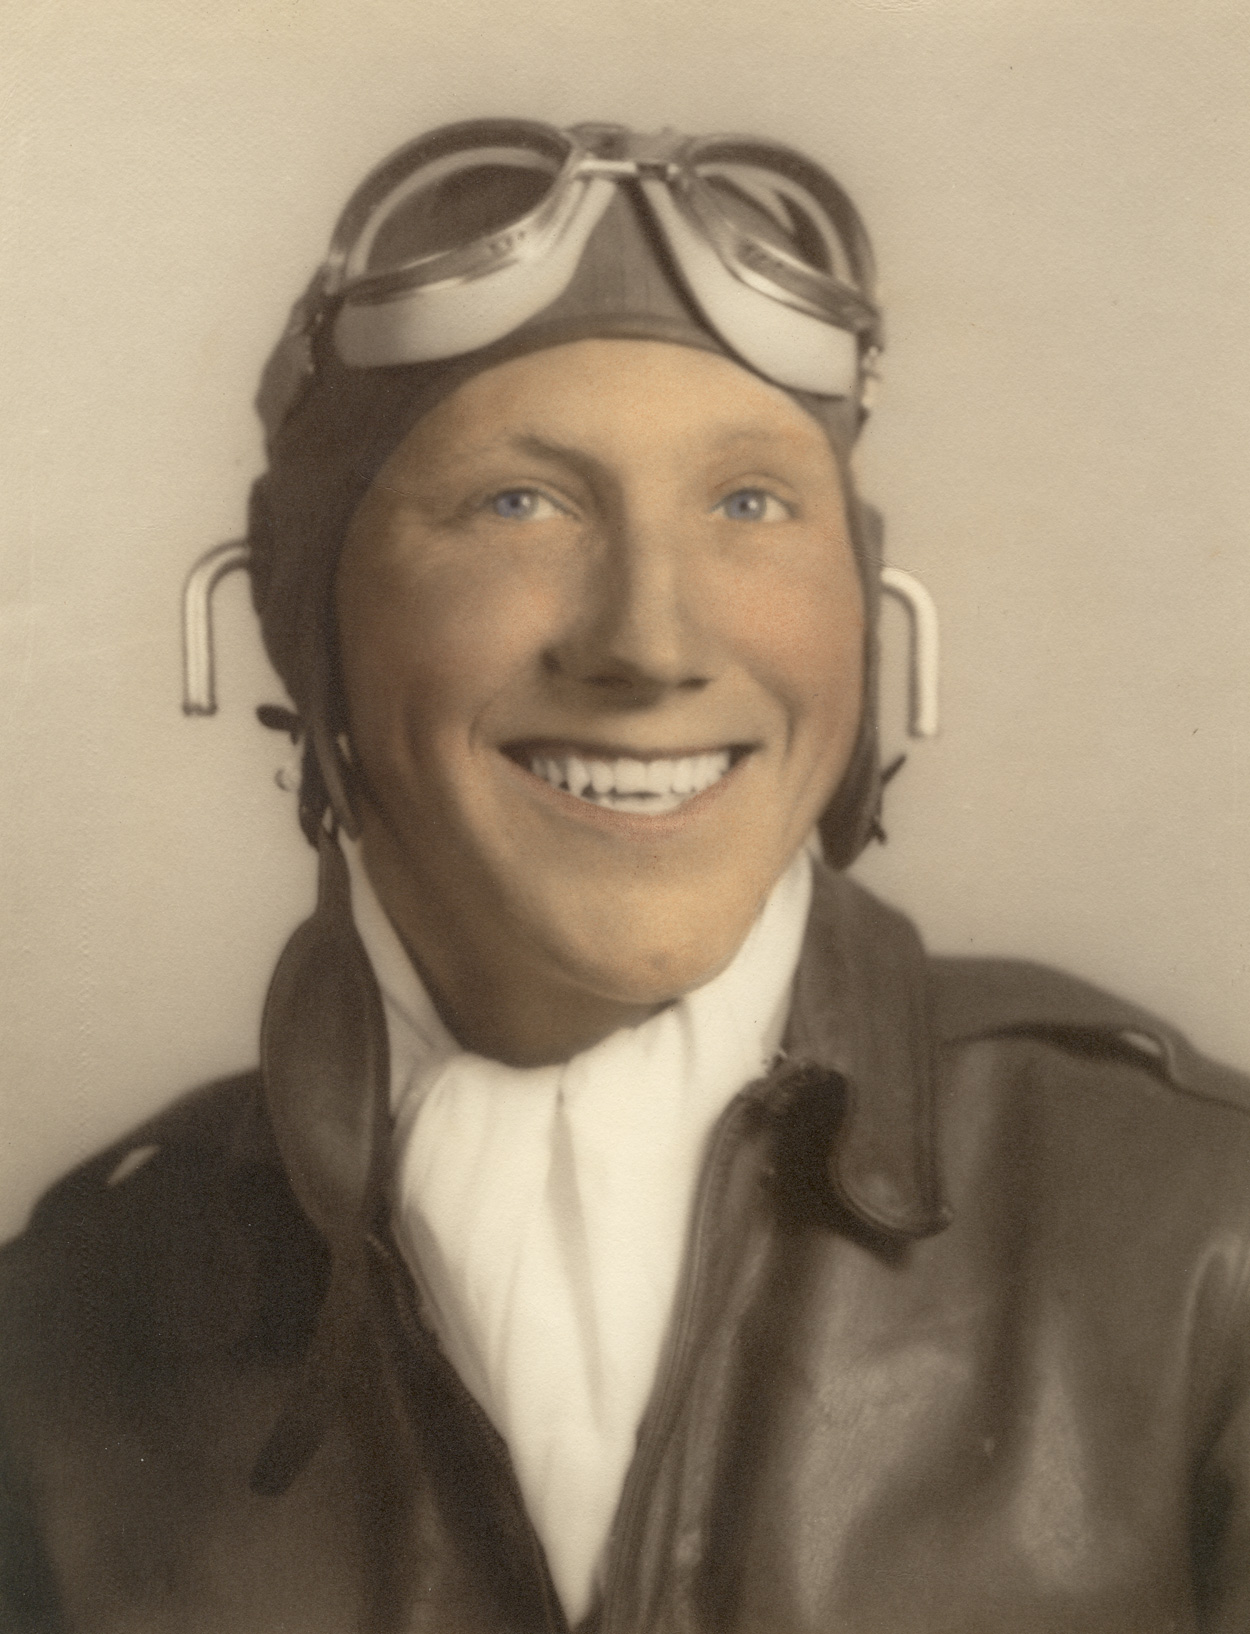 This story shows many of the different airplanes flown by Roman Ohnemus during his military service.